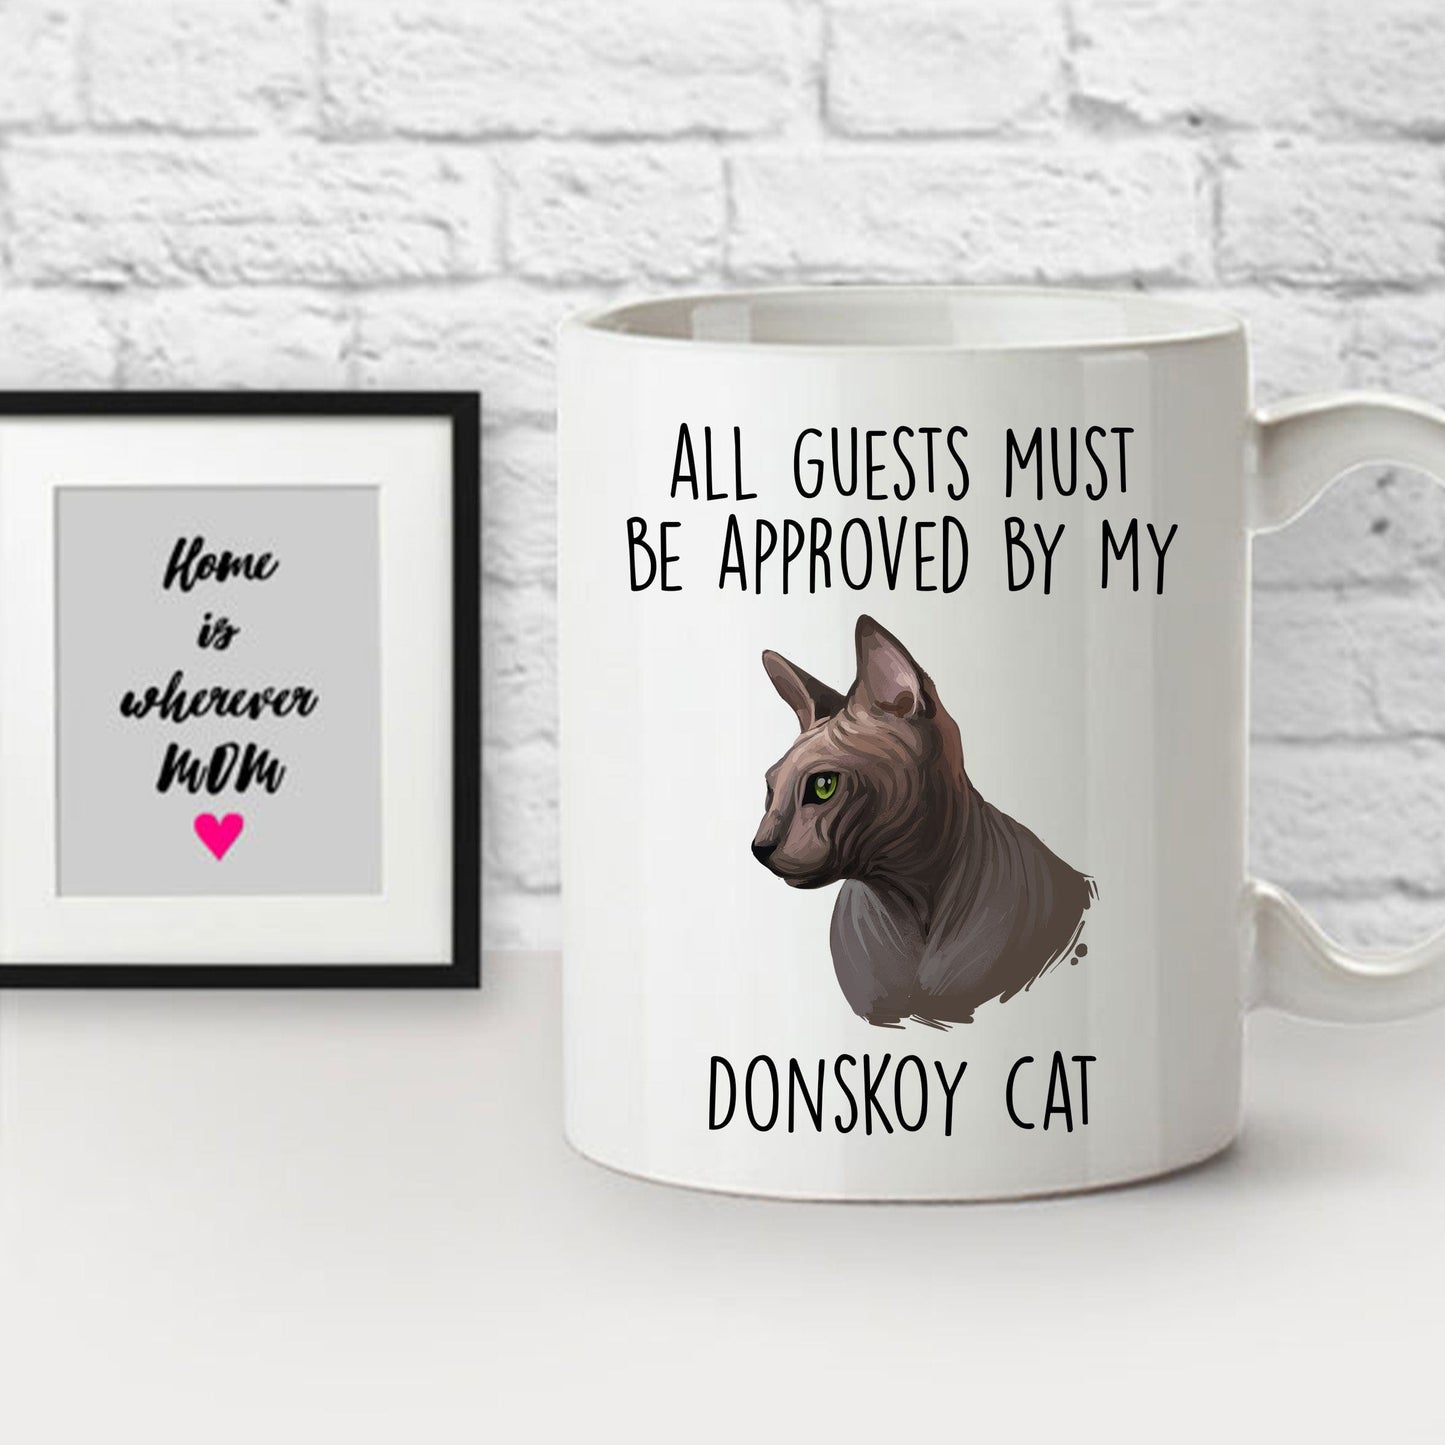 Donskoy Cat Funny Coffee Mug - All Guests Must Be Approved